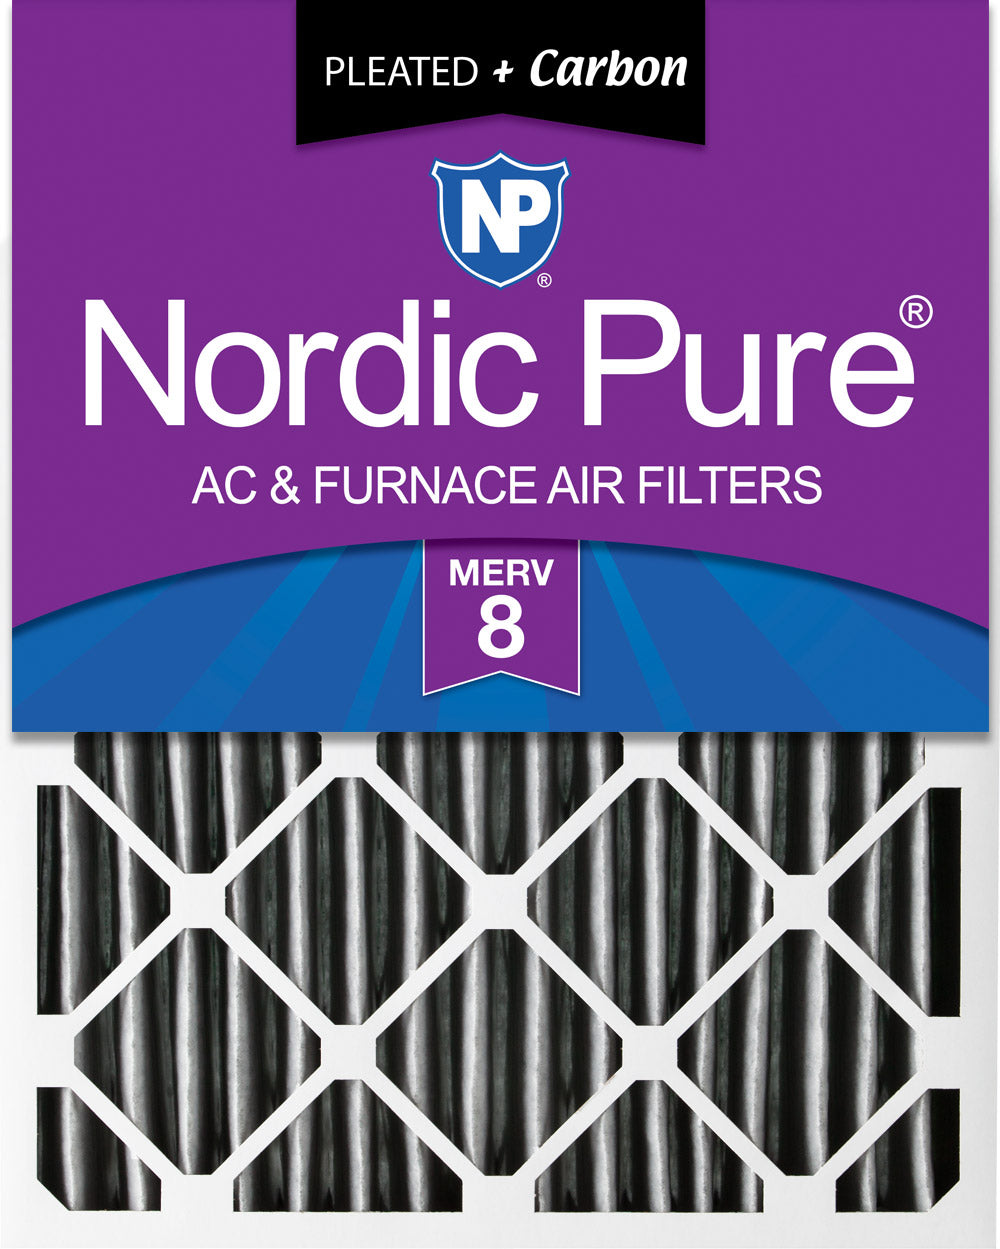 16x20x4 (3 5/8) Furnace Air Filters MERV 8 Pleated Plus Carbon